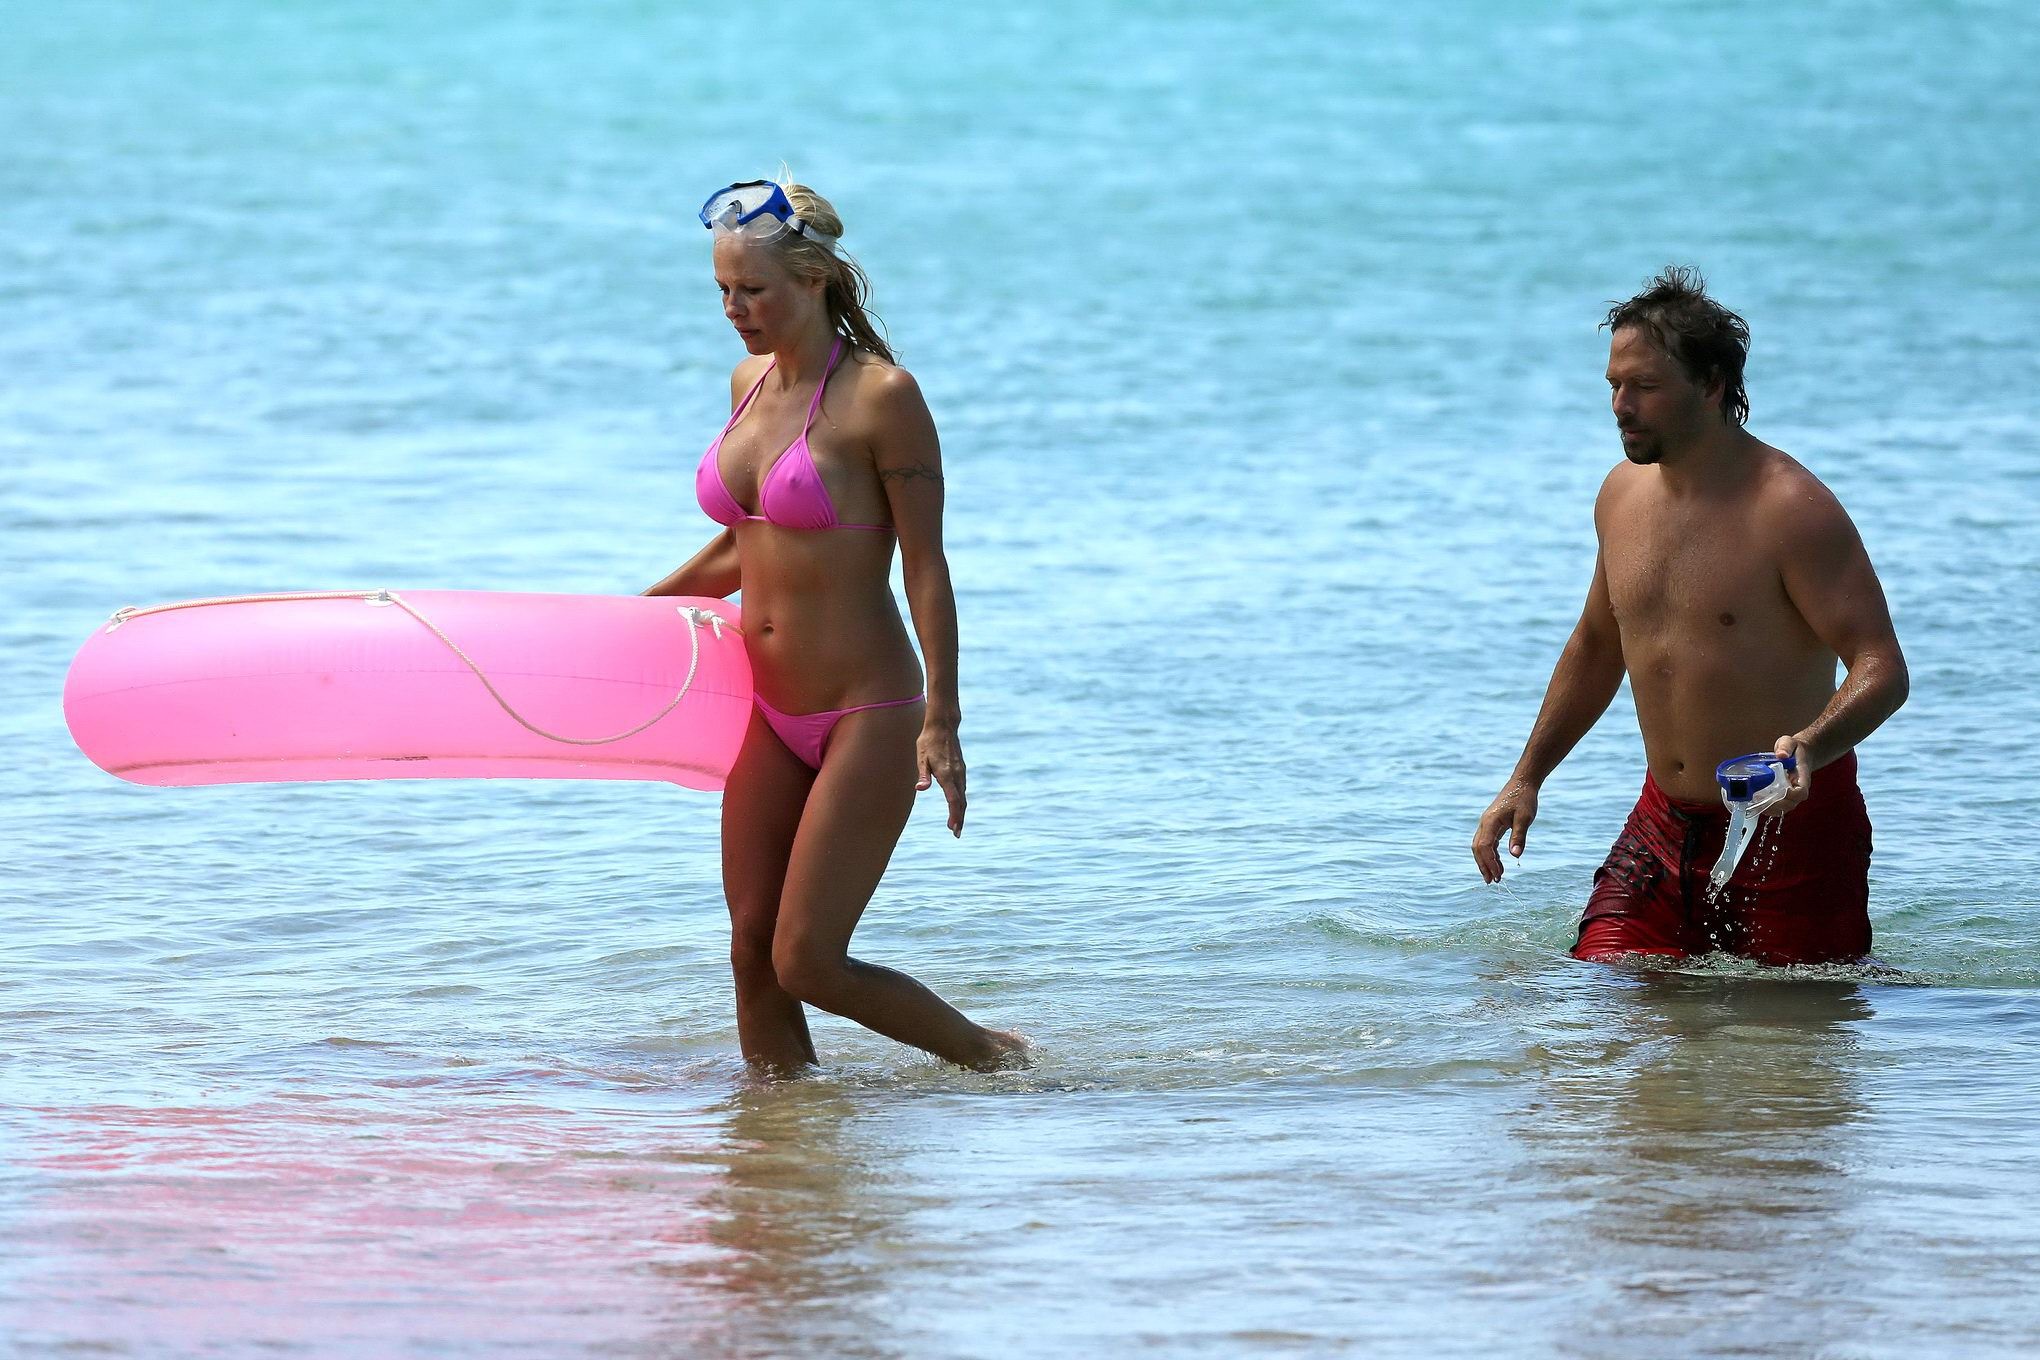 Busty Pamela Anderson showing pokies in a wet pink bikini while snorkeling on a  #75221525